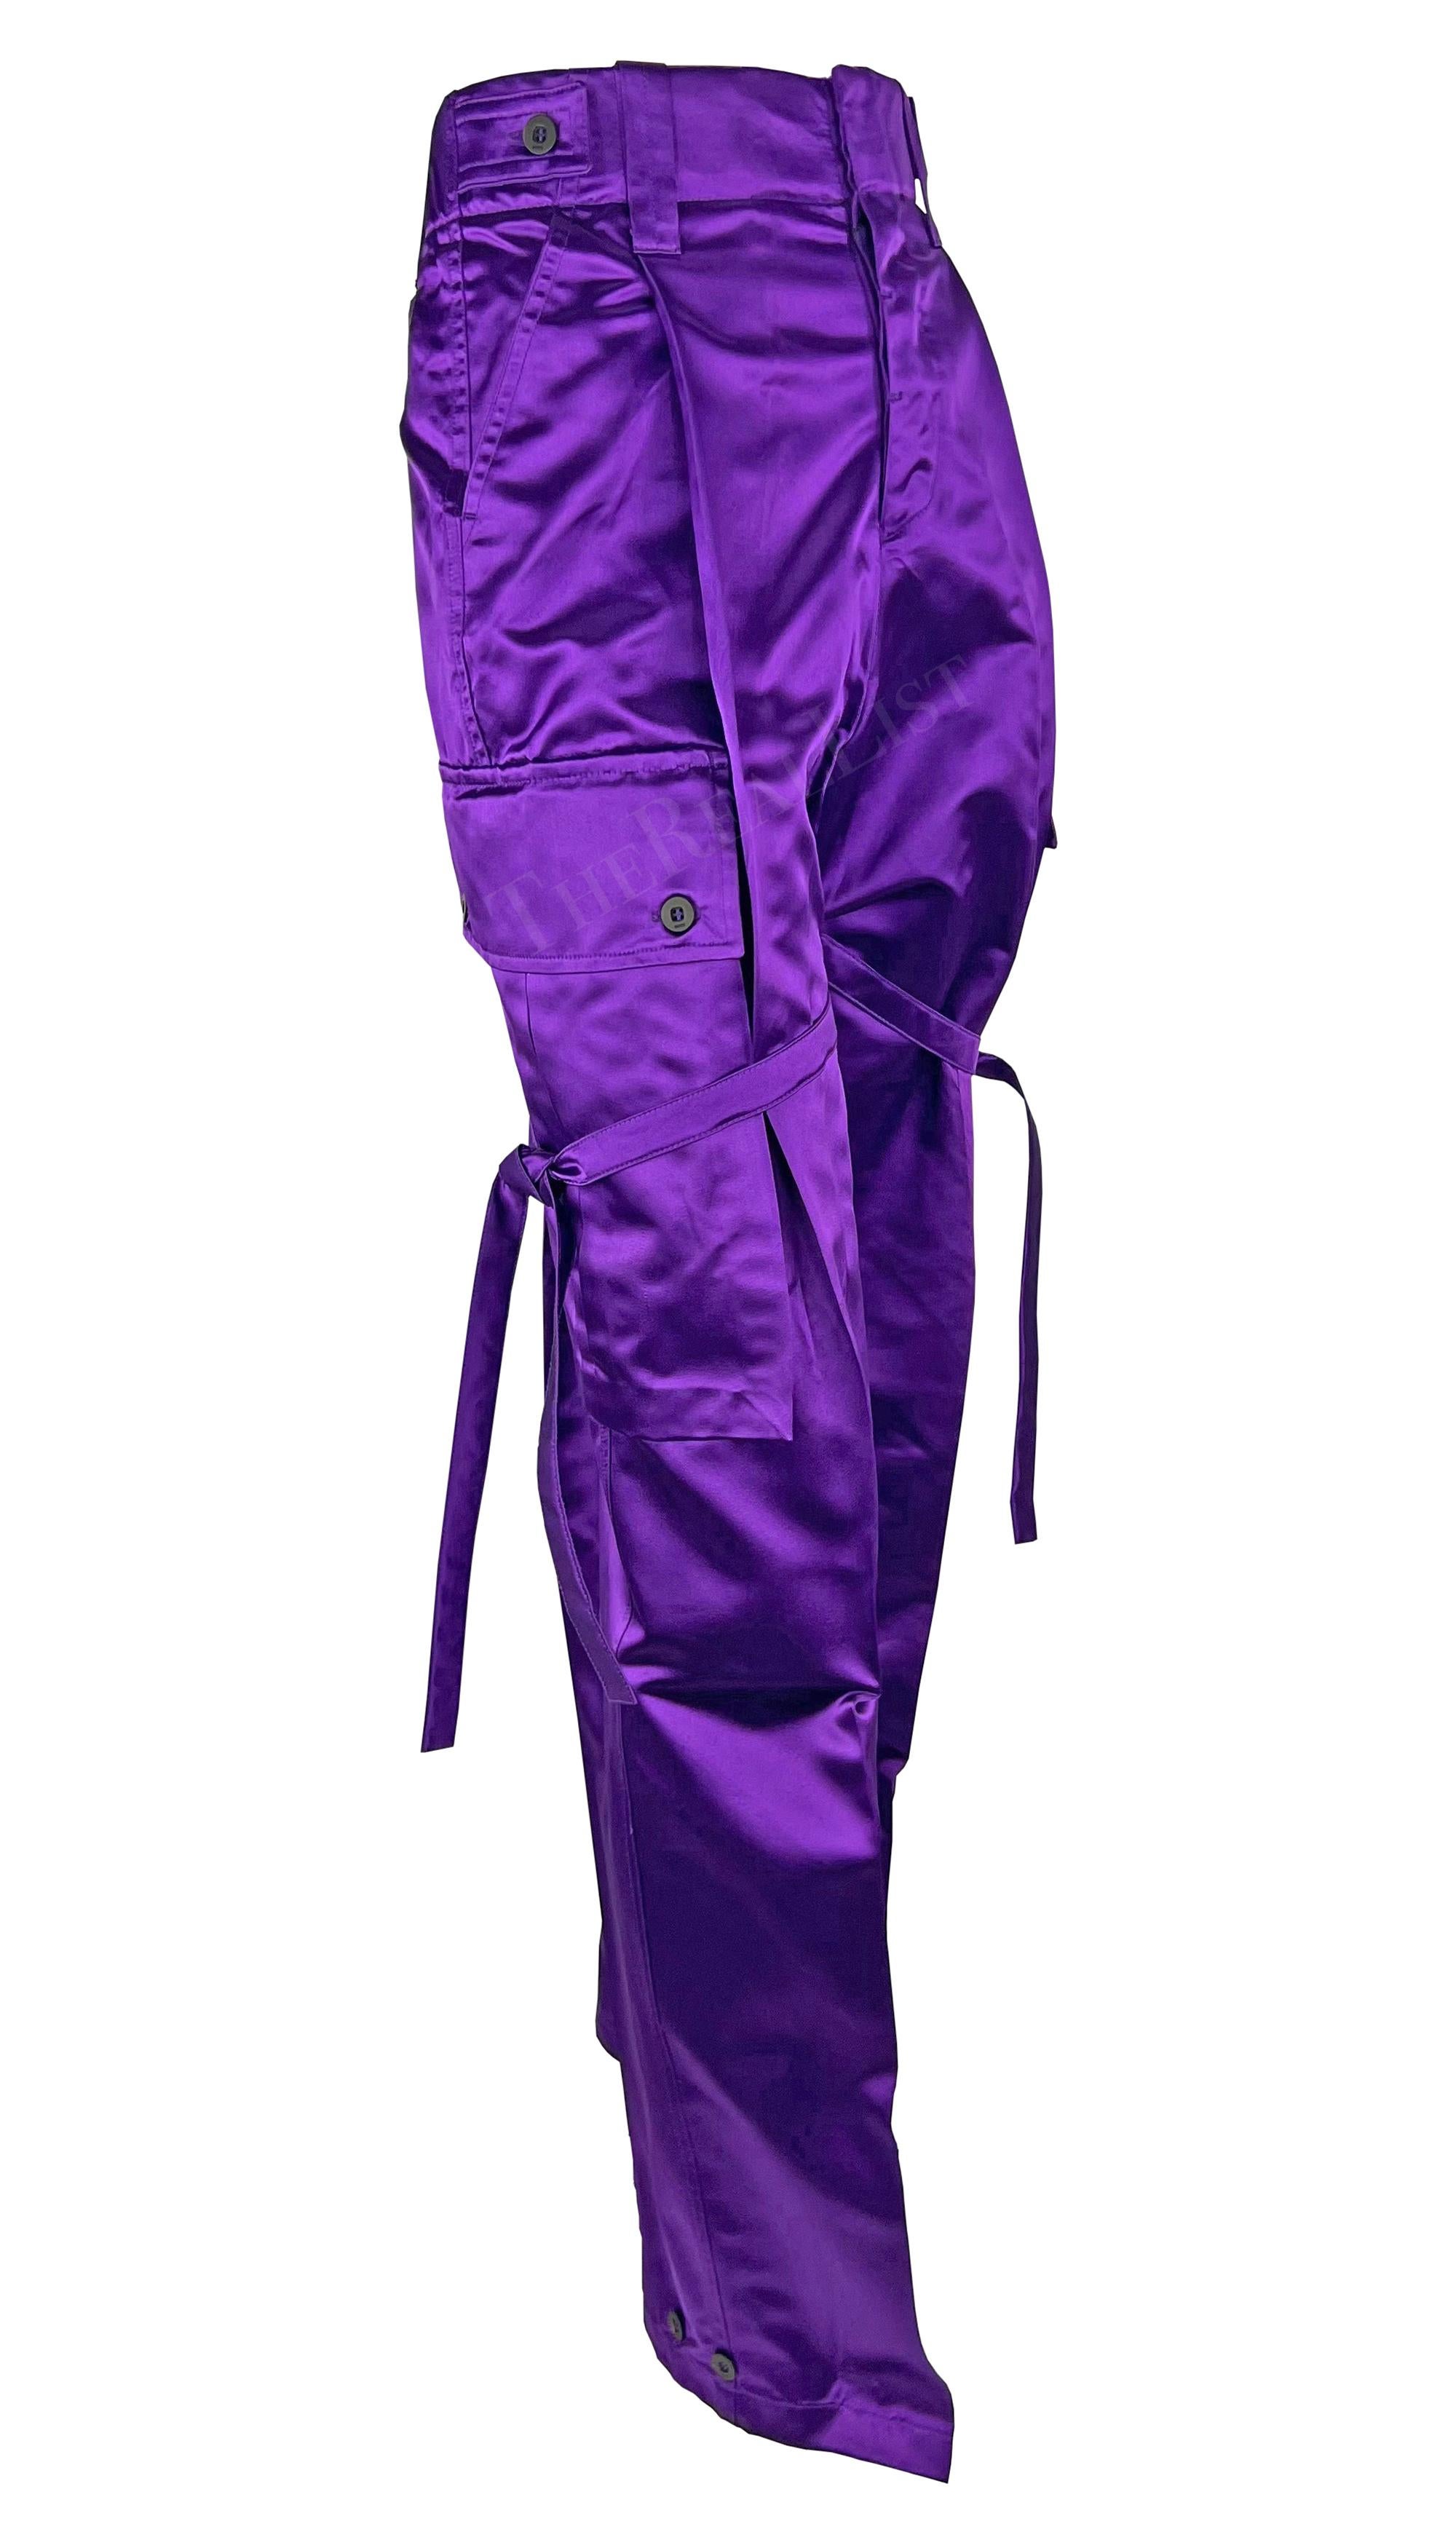 NWT S/S 2001 Gucci by Tom Ford Runway Purple Satin Tie Wide Leg Cargo Pants  For Sale 6